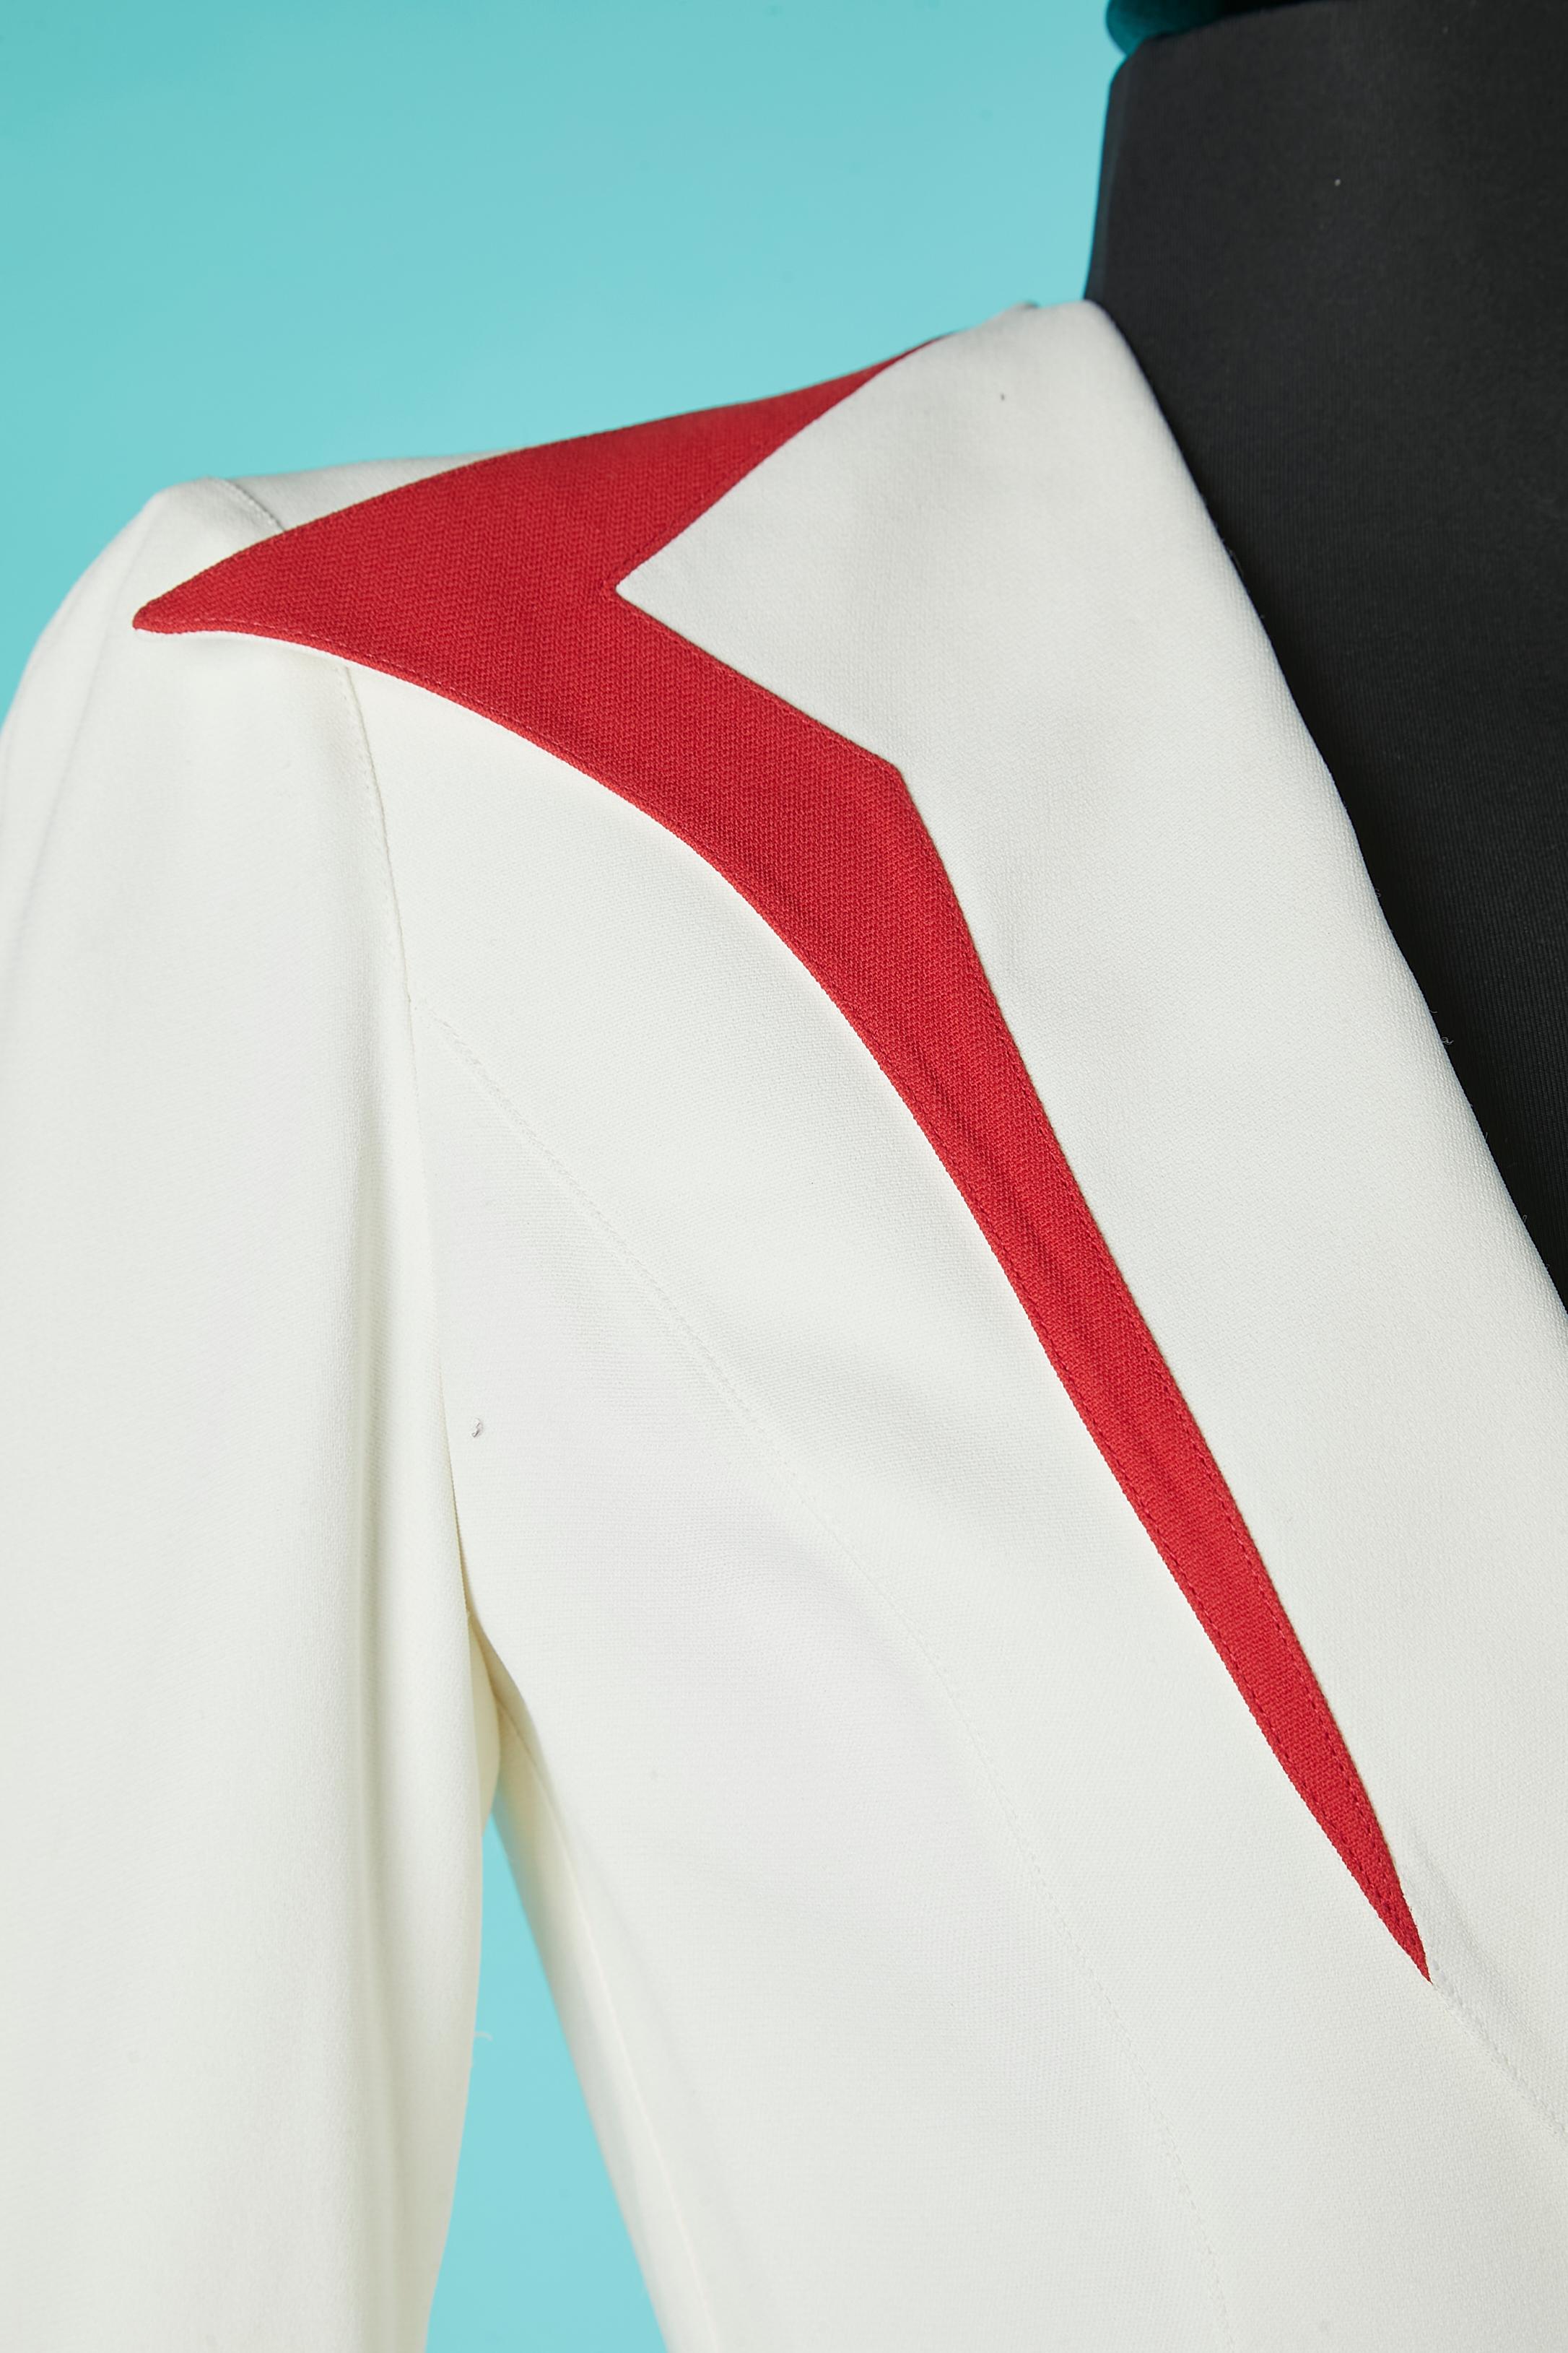 Asymmetrical ivory skirt-suit with red details and red skirt Thierry Mugler  In Excellent Condition For Sale In Saint-Ouen-Sur-Seine, FR